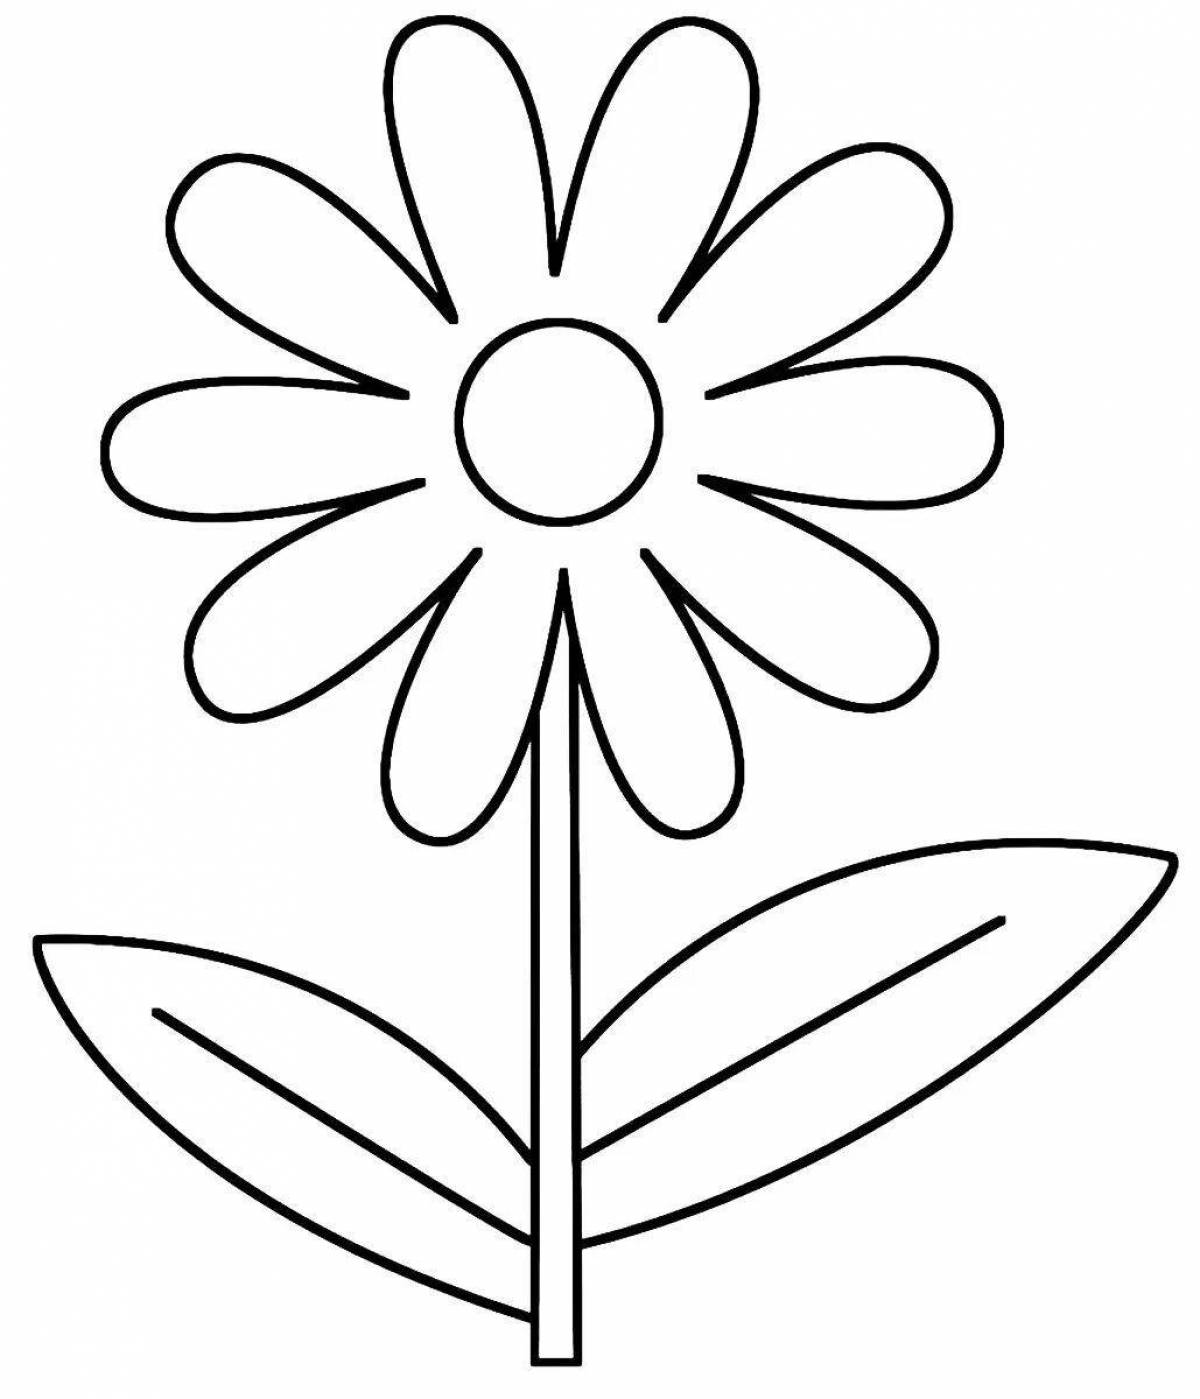 Colorful drawing of chamomile coloring book